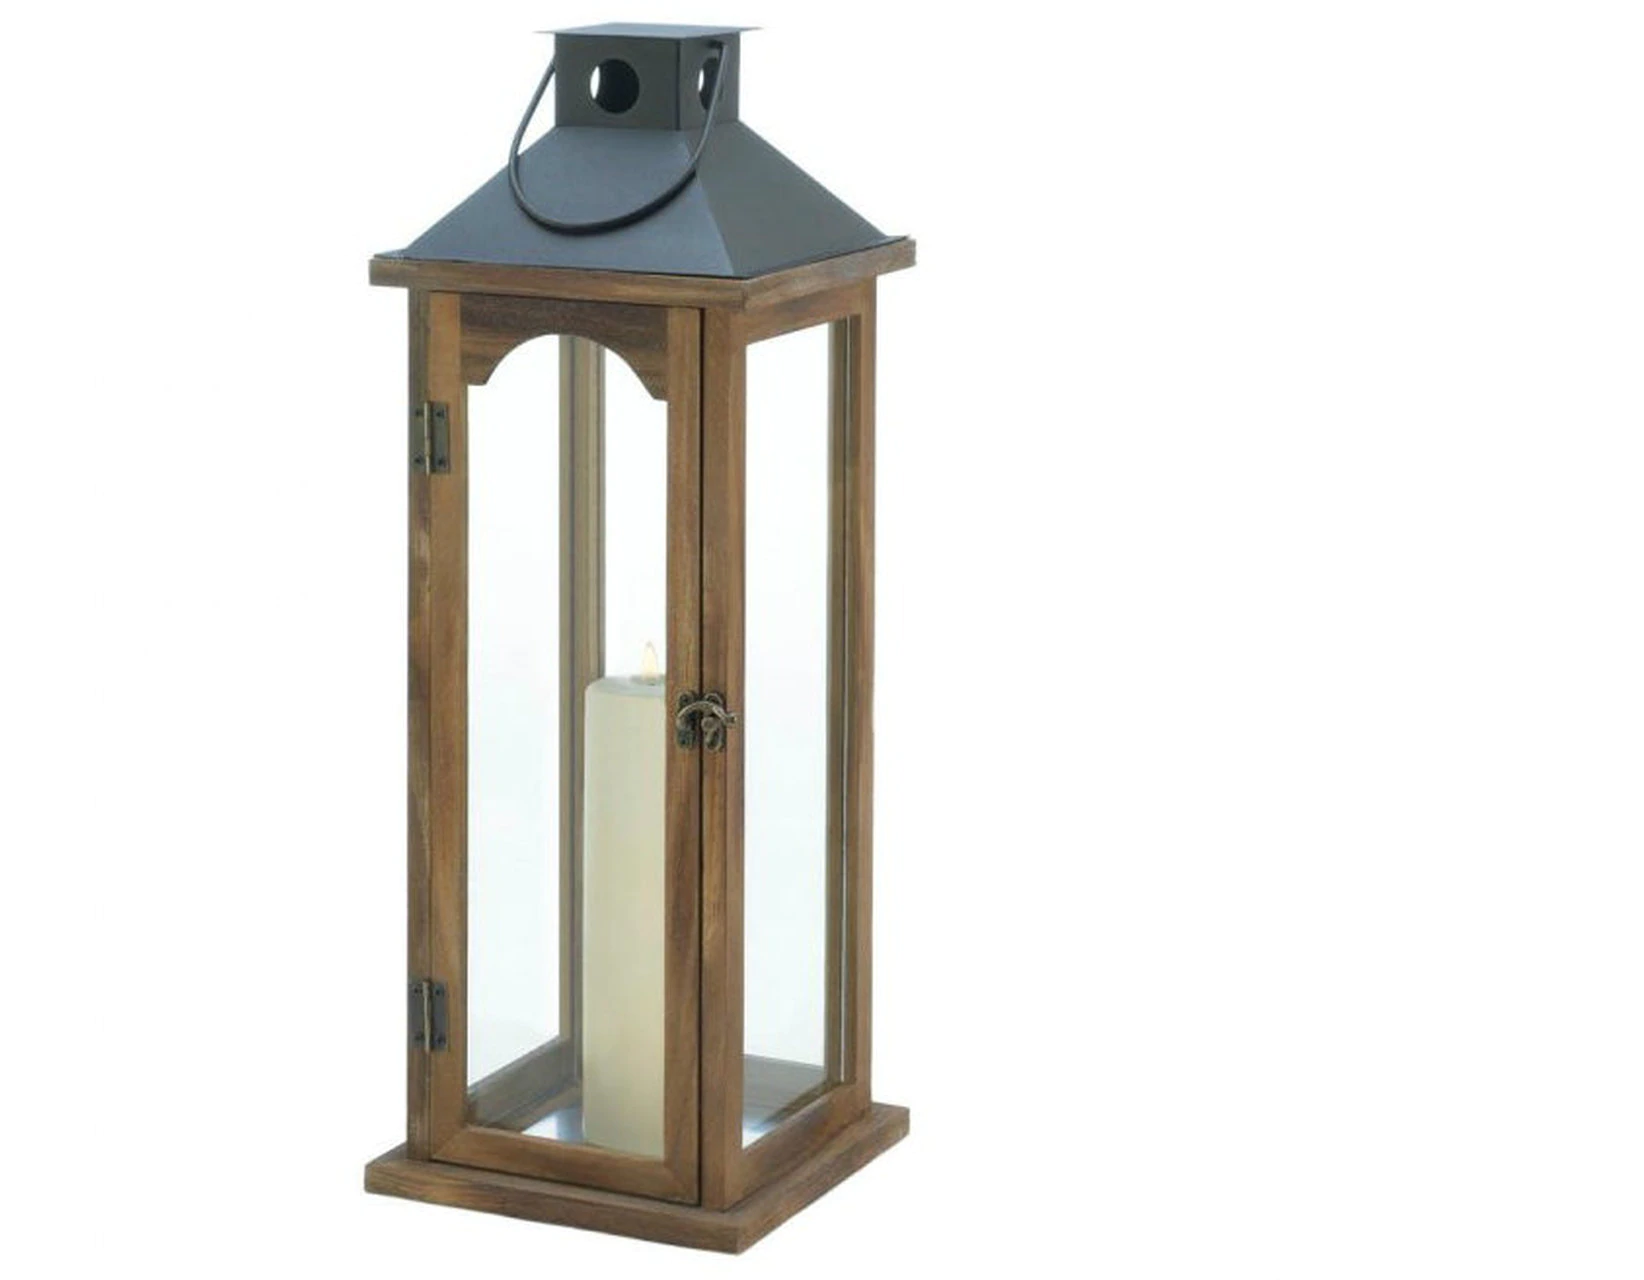 Wood Candle Lantern with Metal Pyramid Top - 22 inches